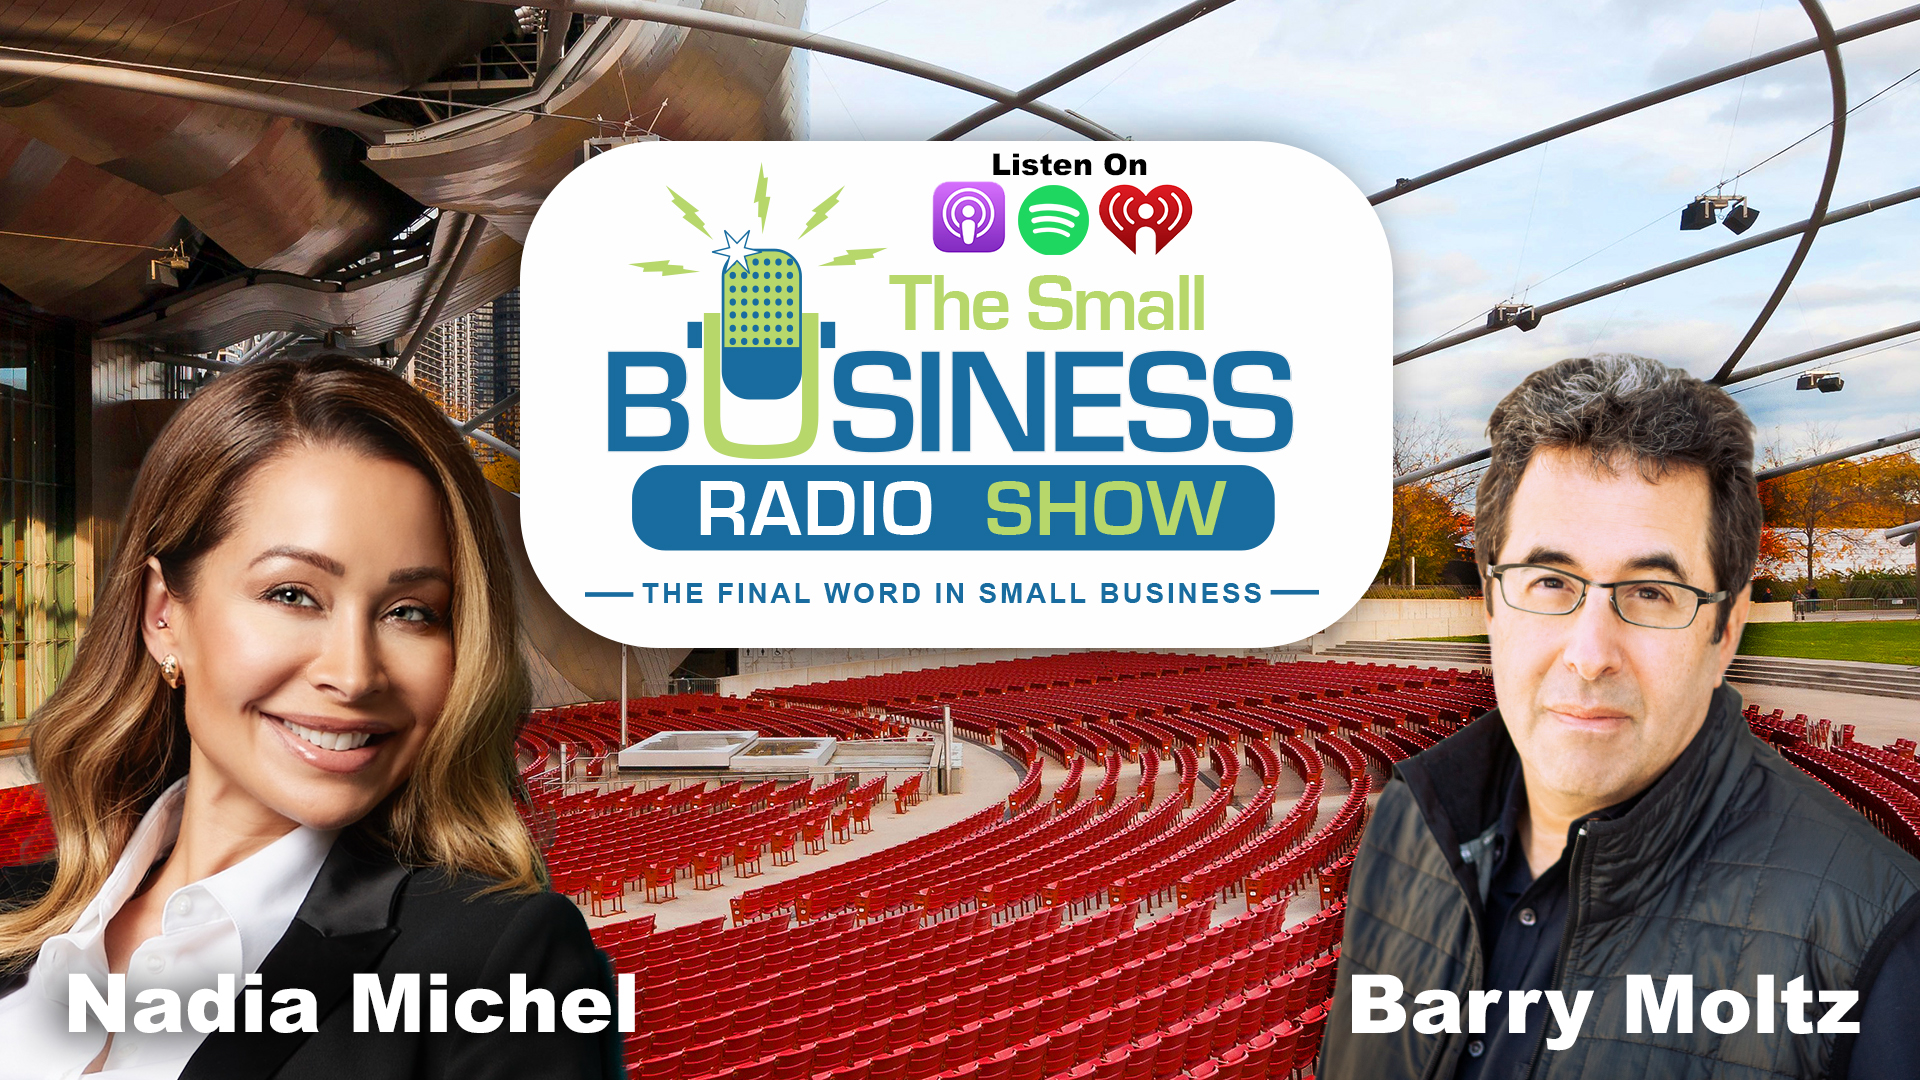 Nadia Michel on The Small Business Radio Show